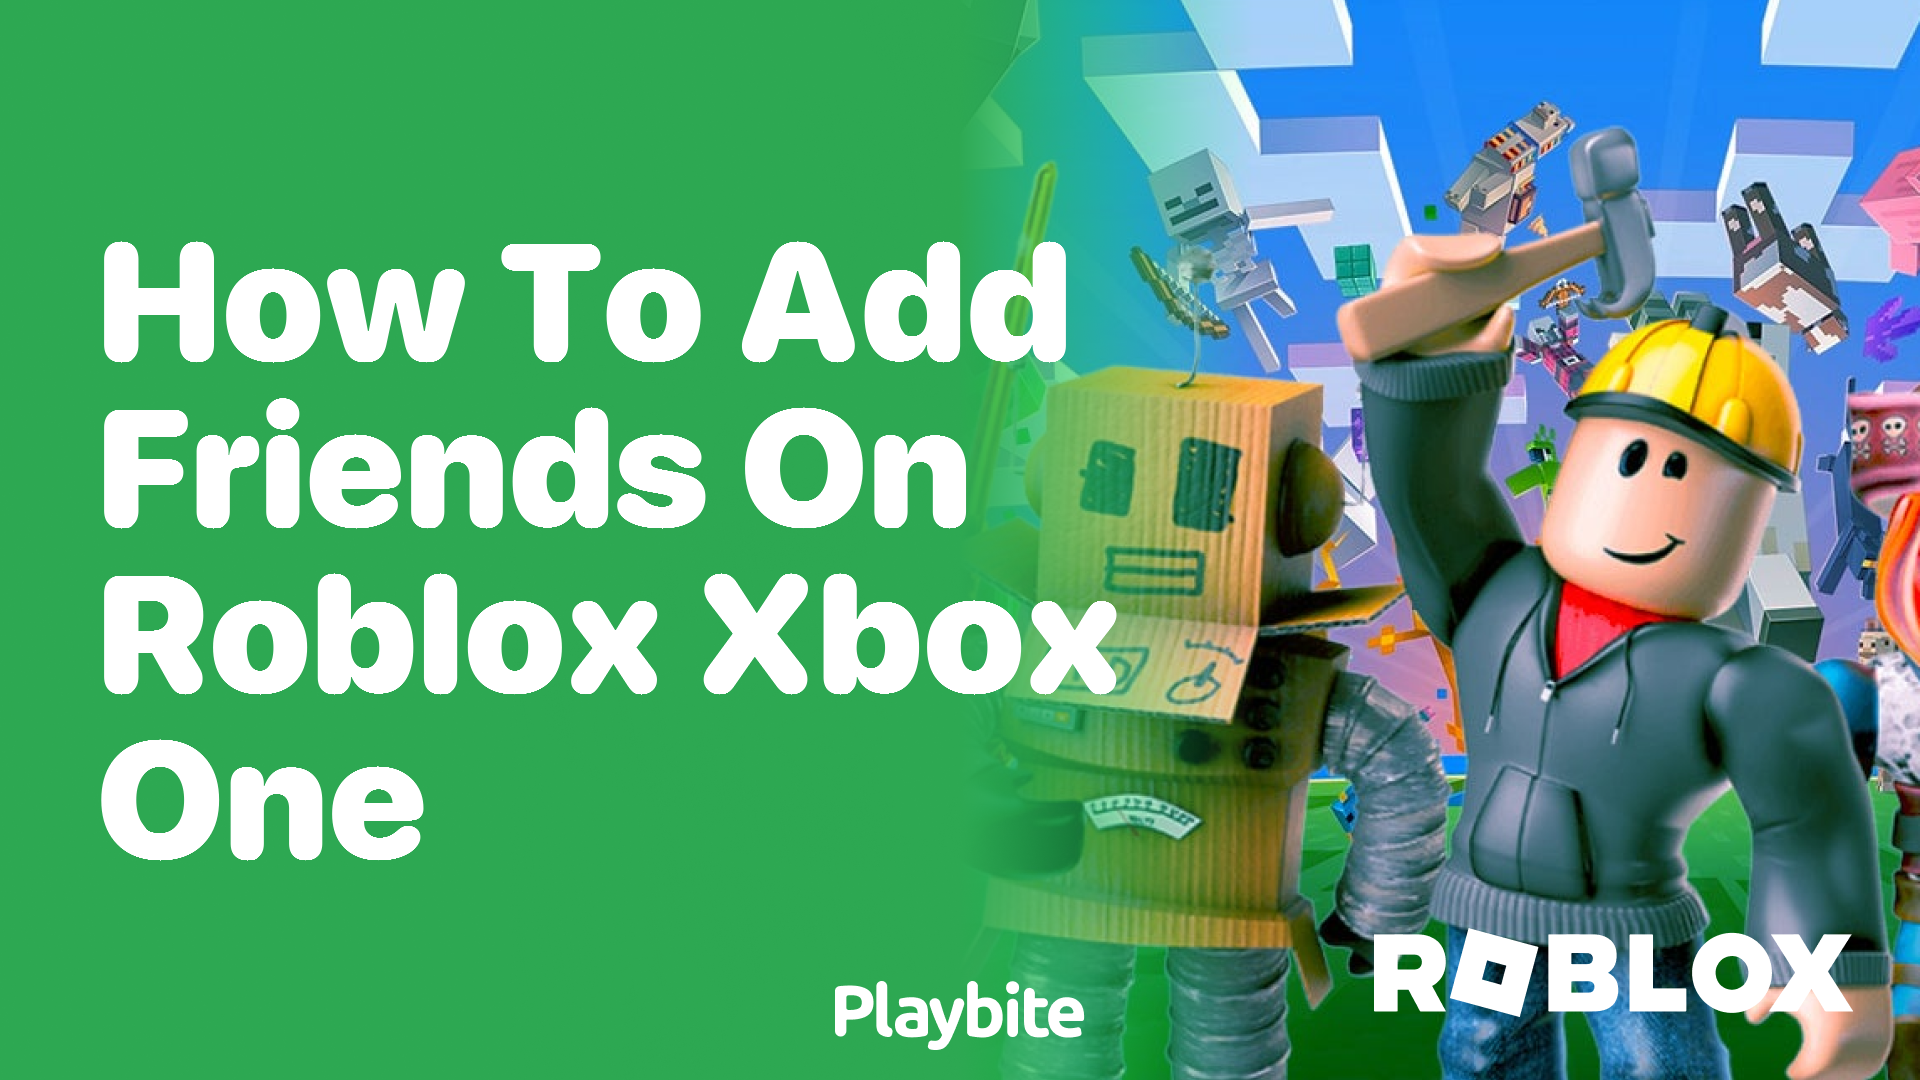 How to Add Friends on Roblox Xbox One: A Step-by-Step Guide - Playbite